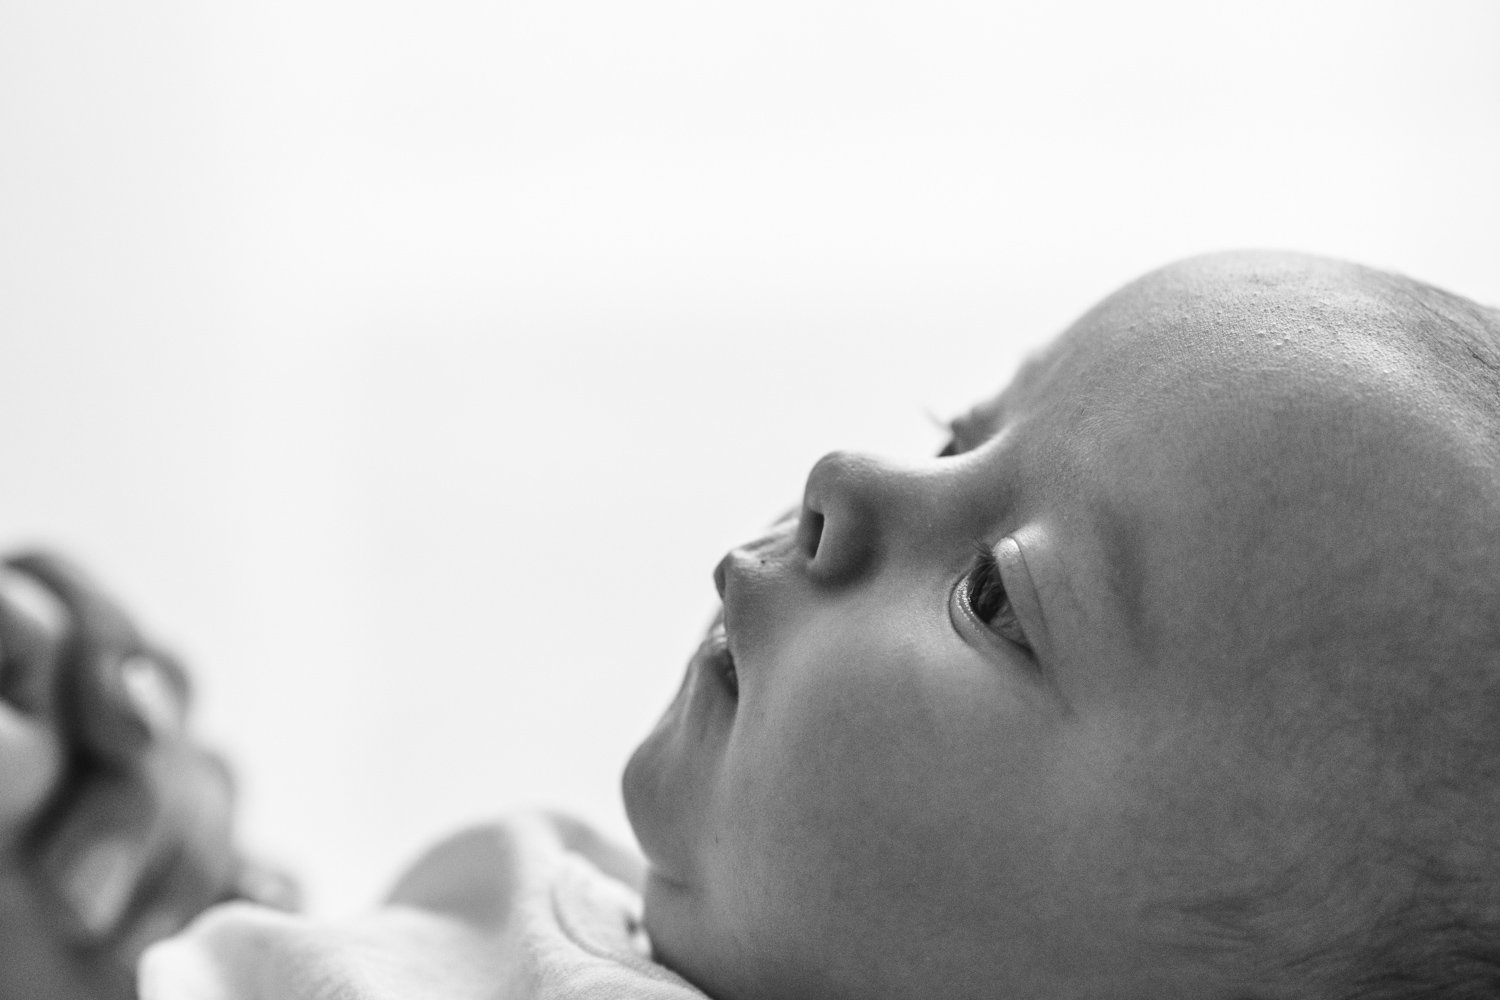  A side profile newborn portrait in black and white captured by Nicole Hawkins Photography on the East Coast. east coast newborns #nicolehawkinsphotography #NJstudionewborns #newbornsession #studionewborns #NJnewbornphotographers #NJphotographers 